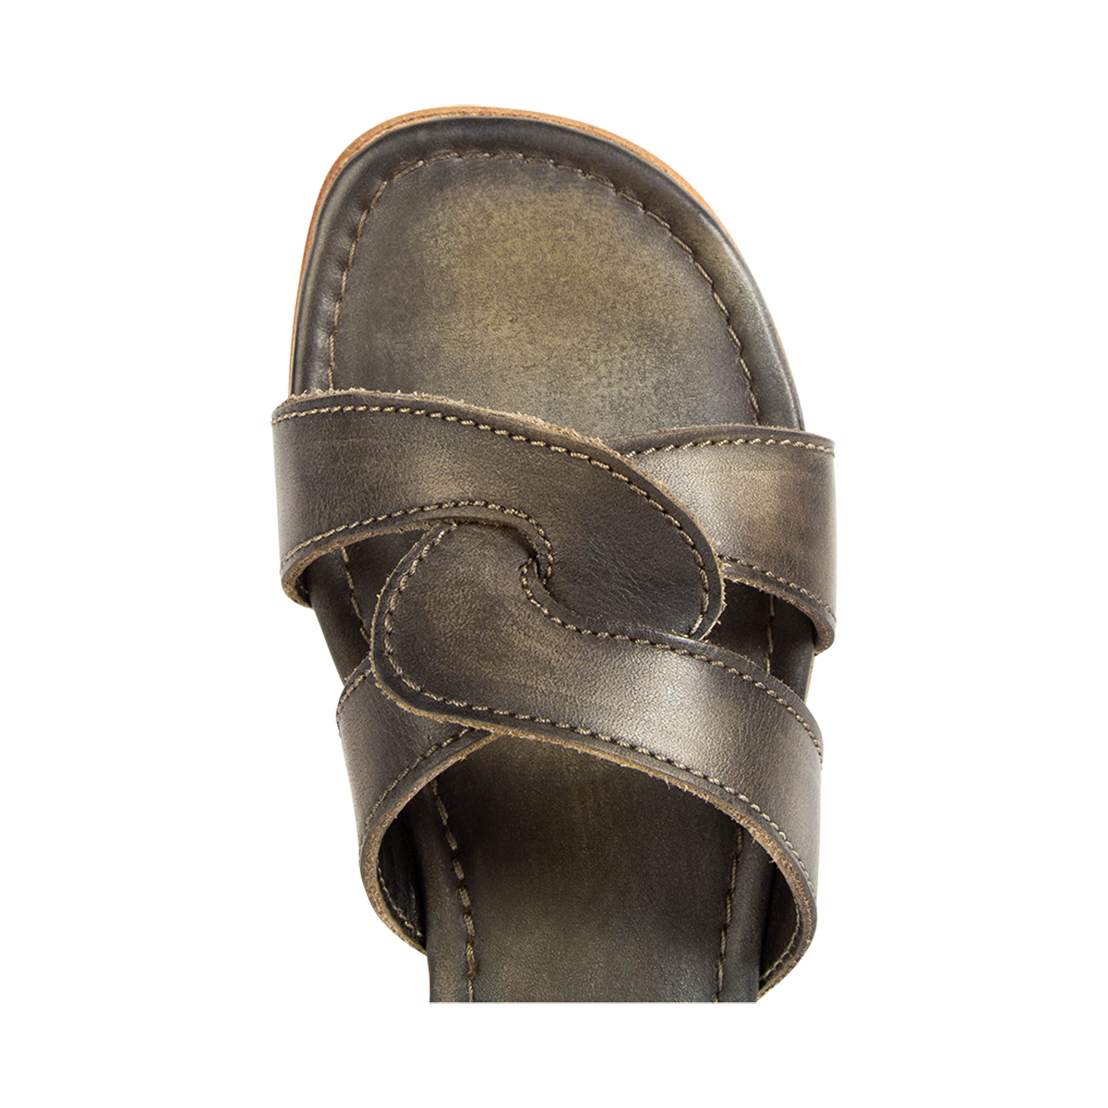 Top view showing criss-cross leather foot strap on FREEBIRD women's Sawyer olive low heeled sandal